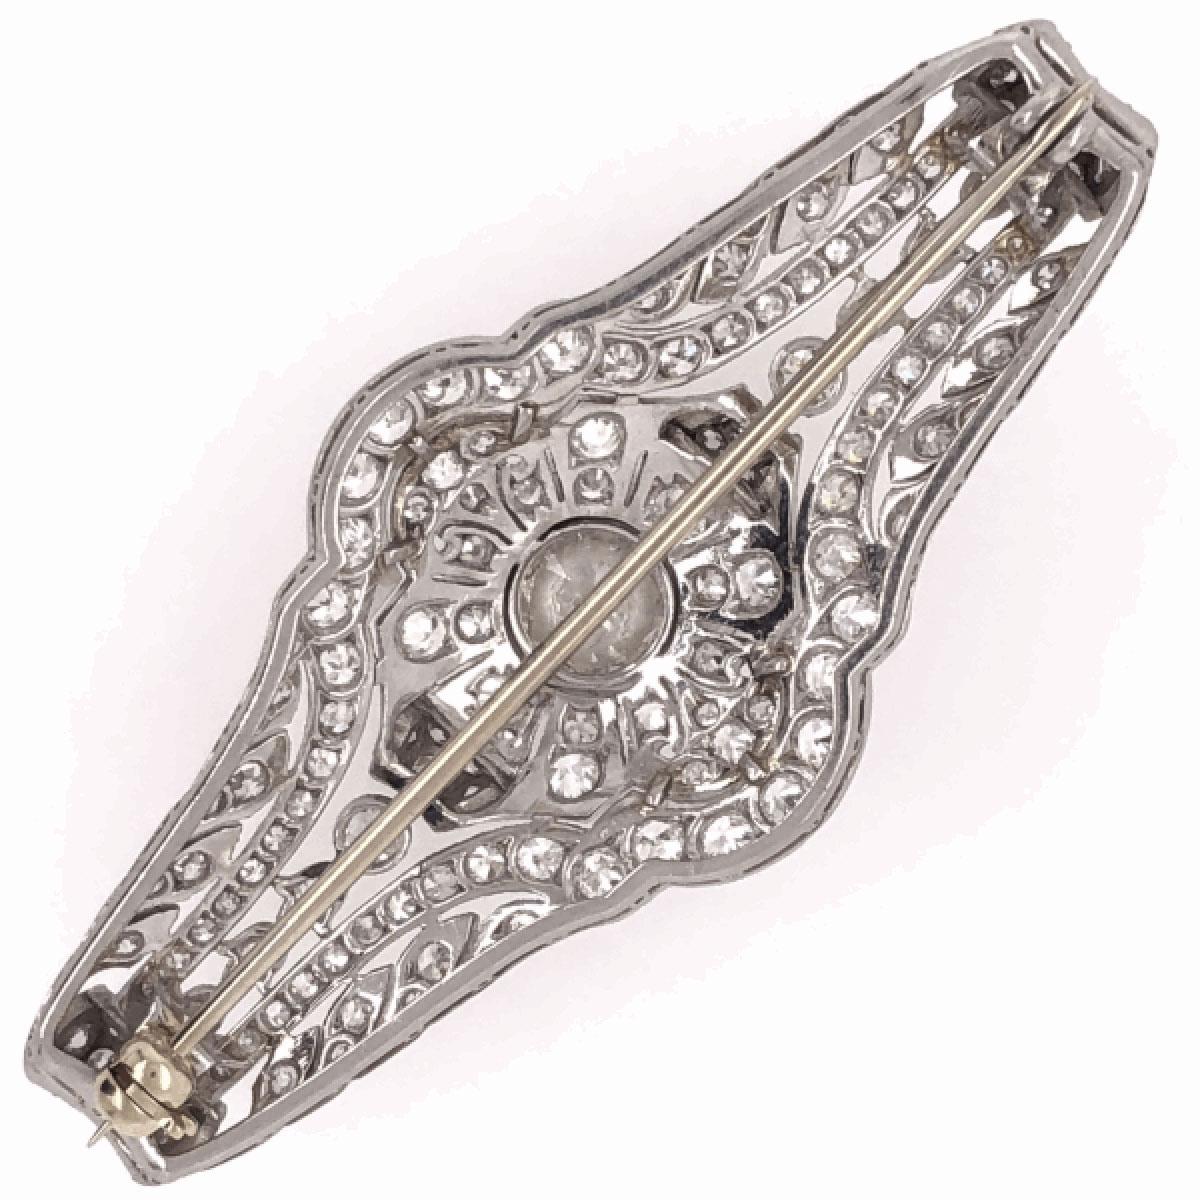 Simply Beautiful! Elegant and finely detailed Art Deco Diamond Platinum Brooch Pin.  Handmade Filigree and Milgrain, set with Old European cut Diamonds approx. 0.75 total Carat weight and side Diamonds approx. 3.40 total Carat weight. The Brooch is